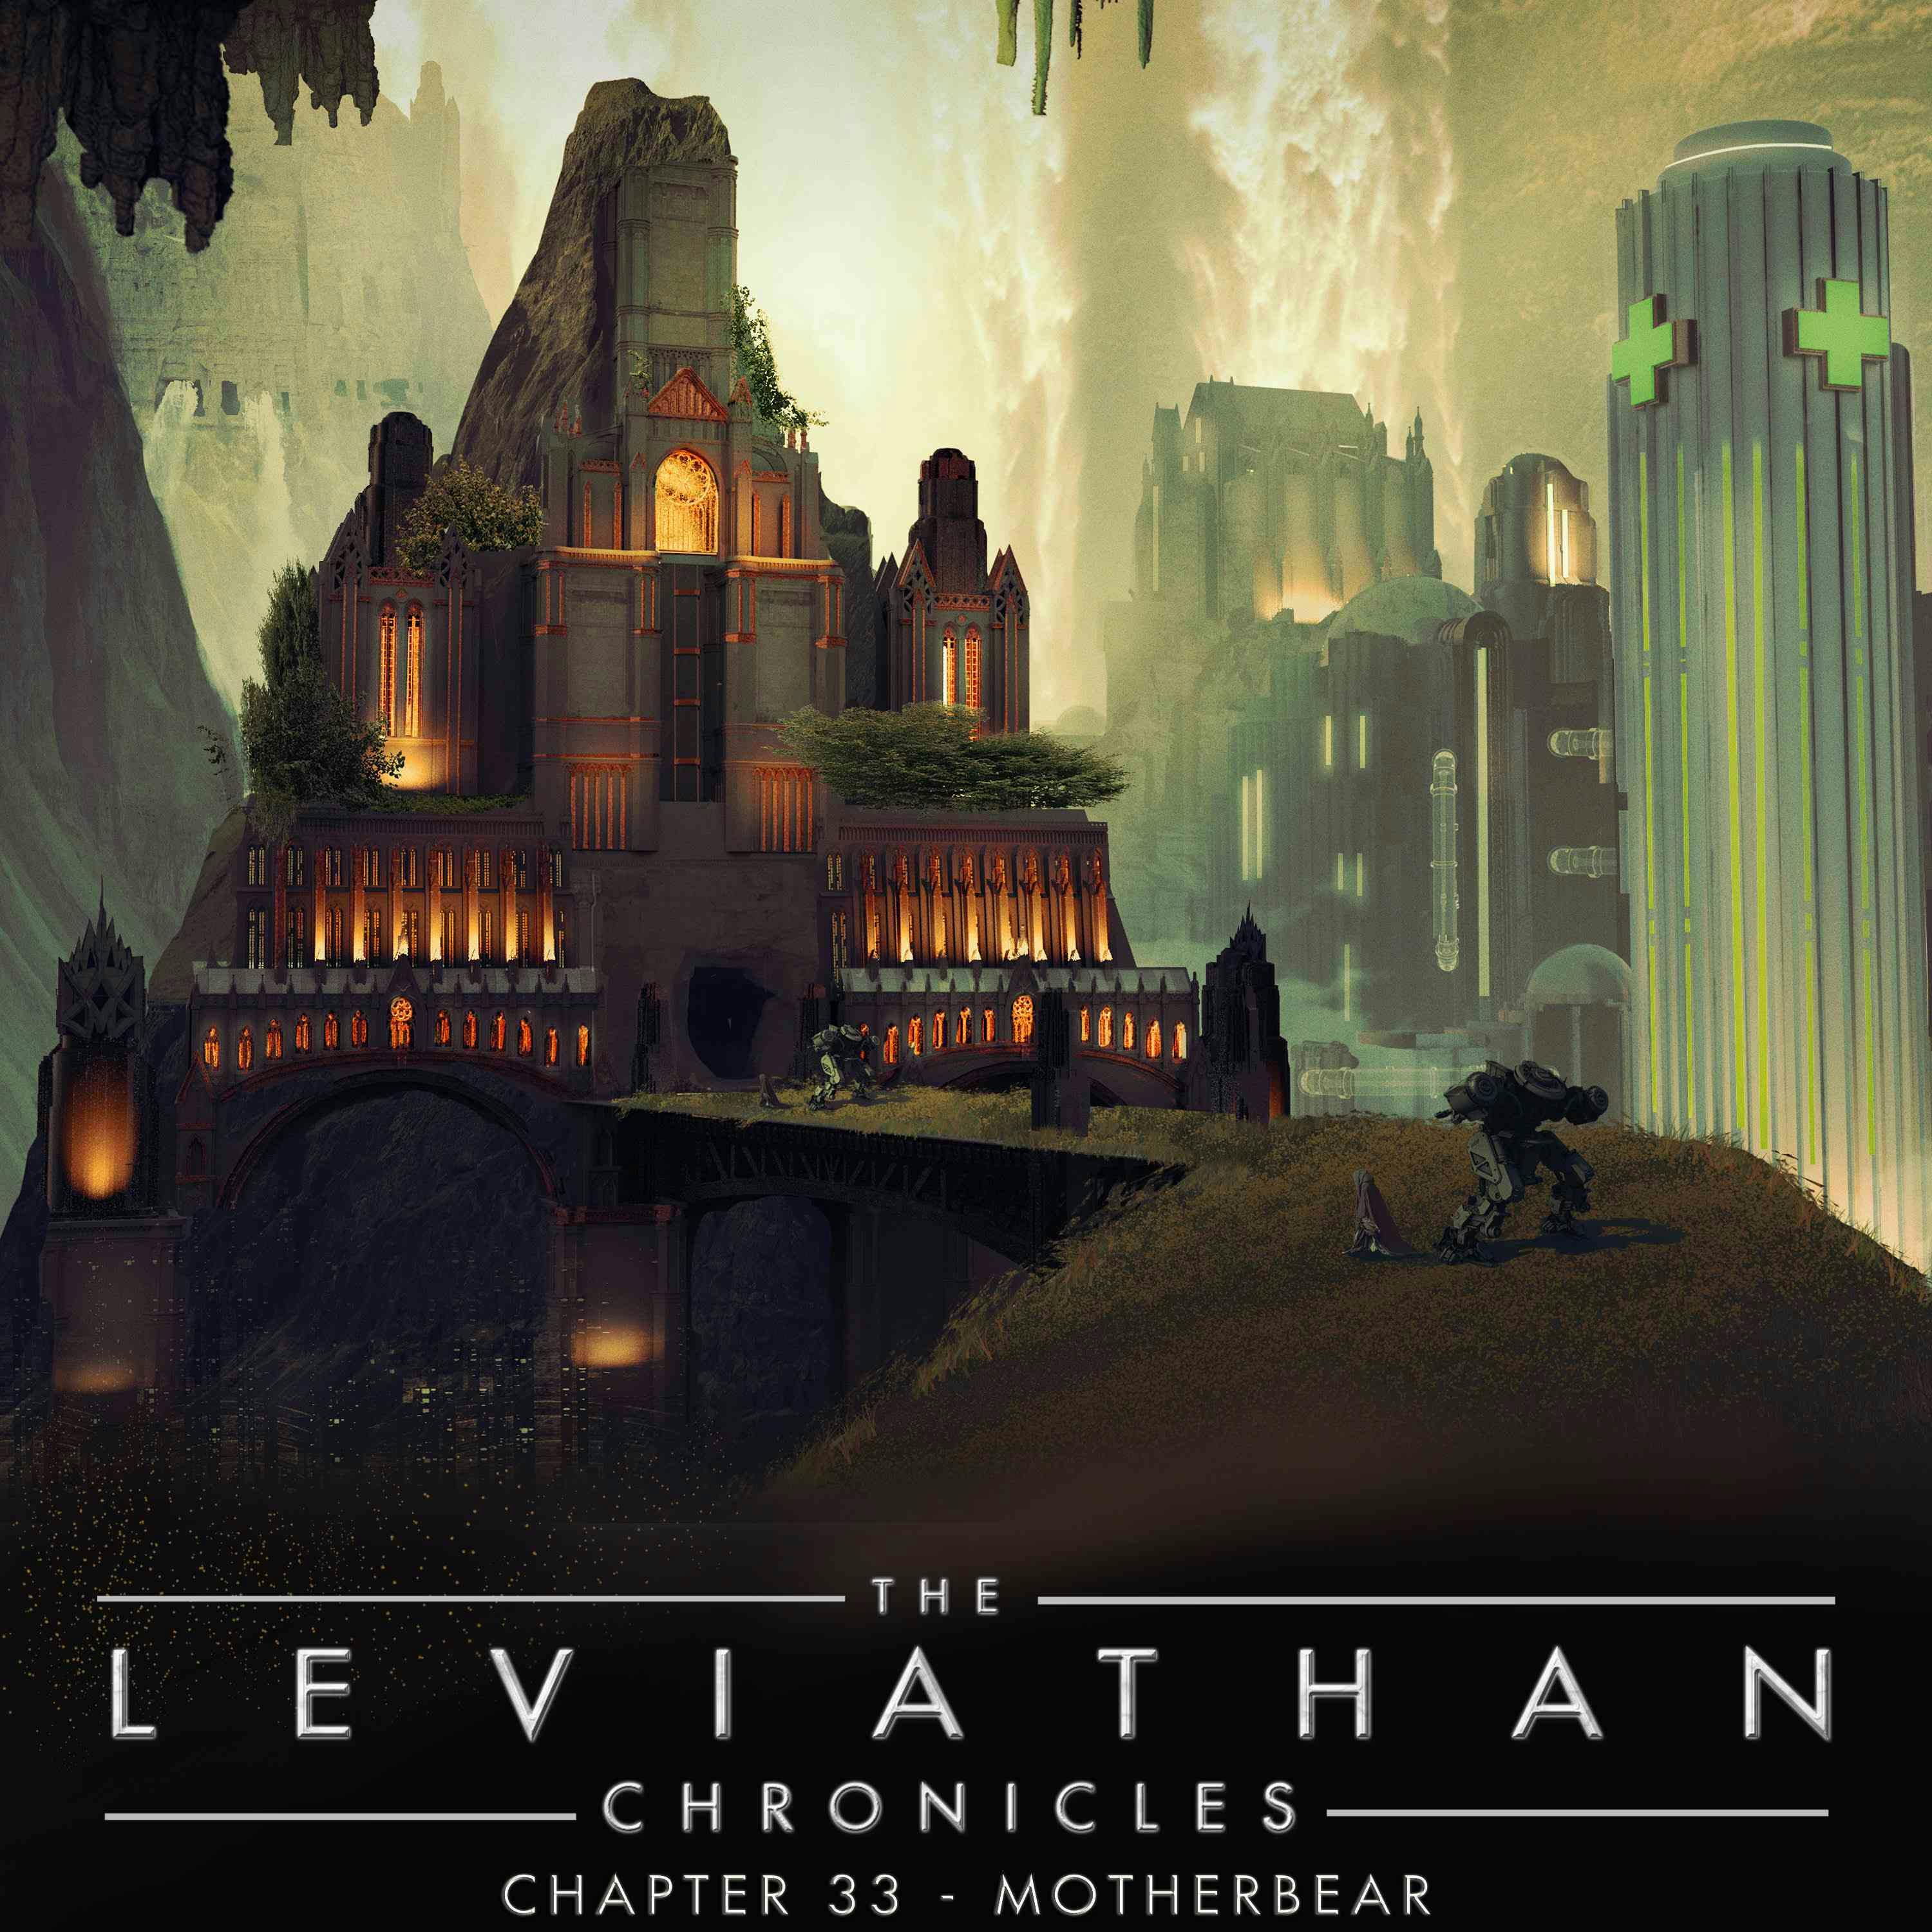 The Leviathan Chronicles | Chapter 33 - Motherbear